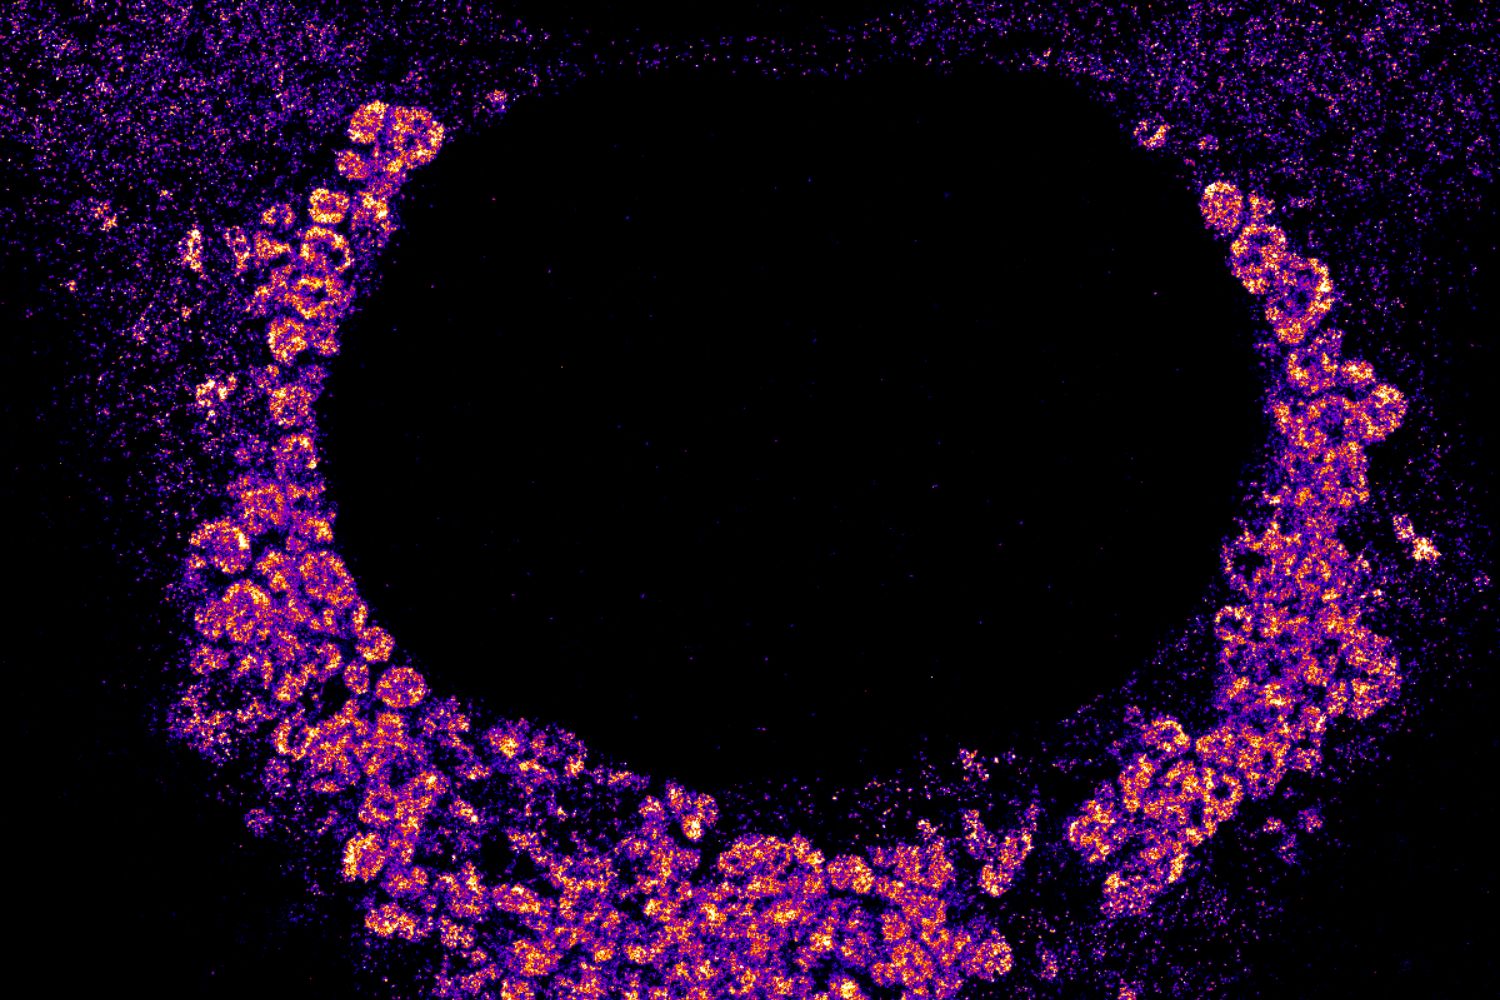 Viral RNA, labeled with a fluorescent dye, clusters around the nucleus of a cell infected with SARS-CoV-2, as captured through super-resolution microscopy. (Image Credit: Andronov et al., Nature Communications)